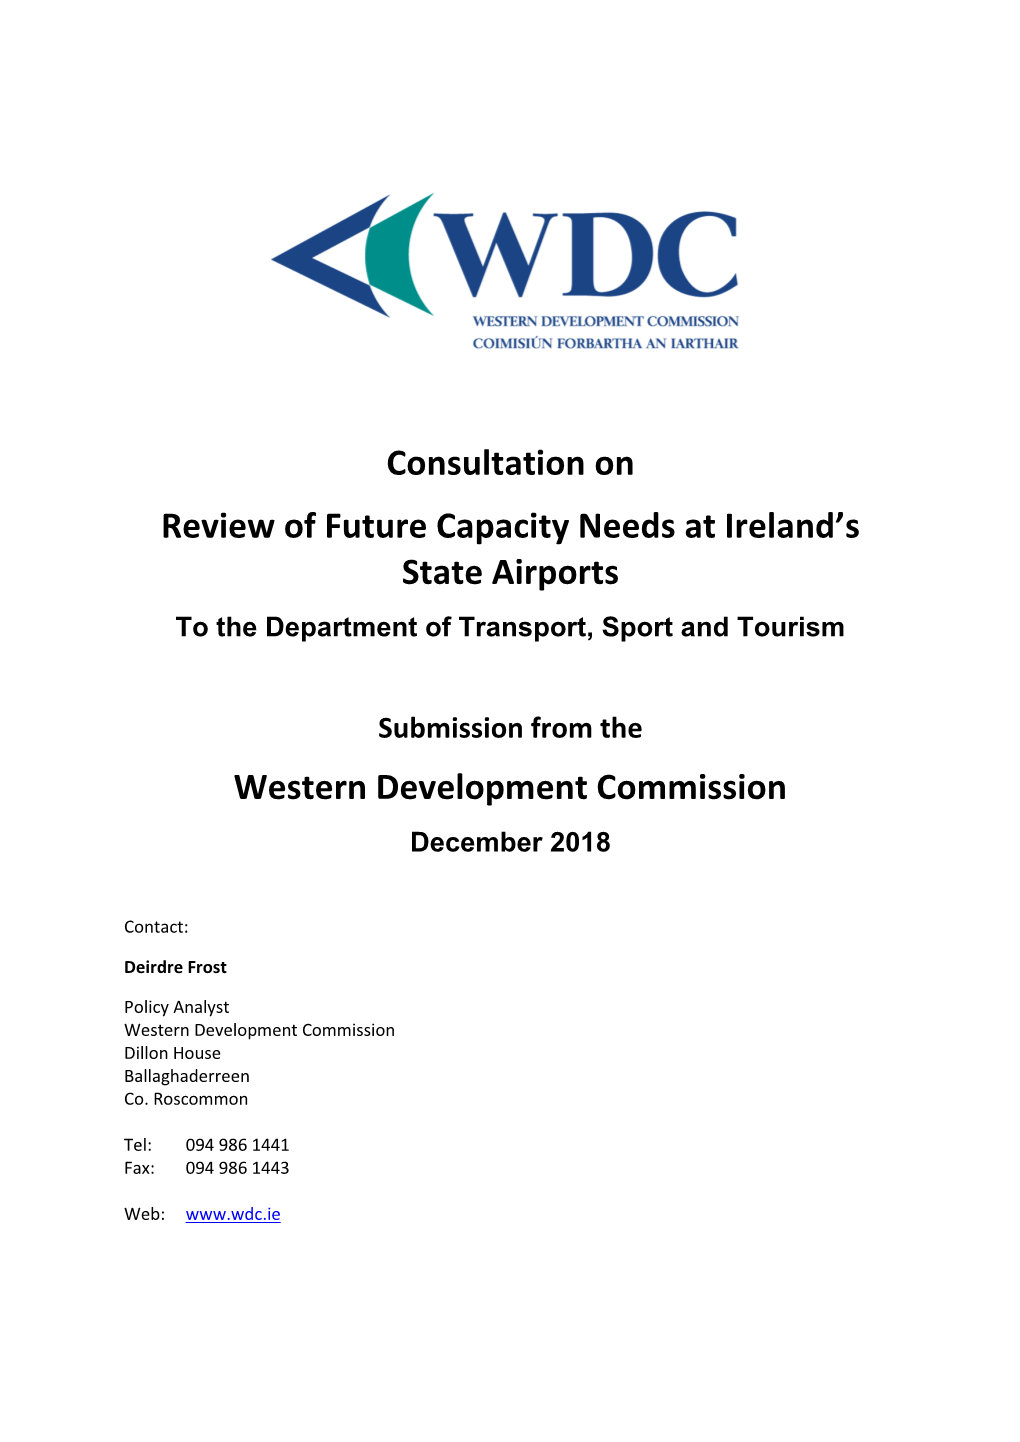 Consultation on Review of Future Capacity Needs at Ireland's State